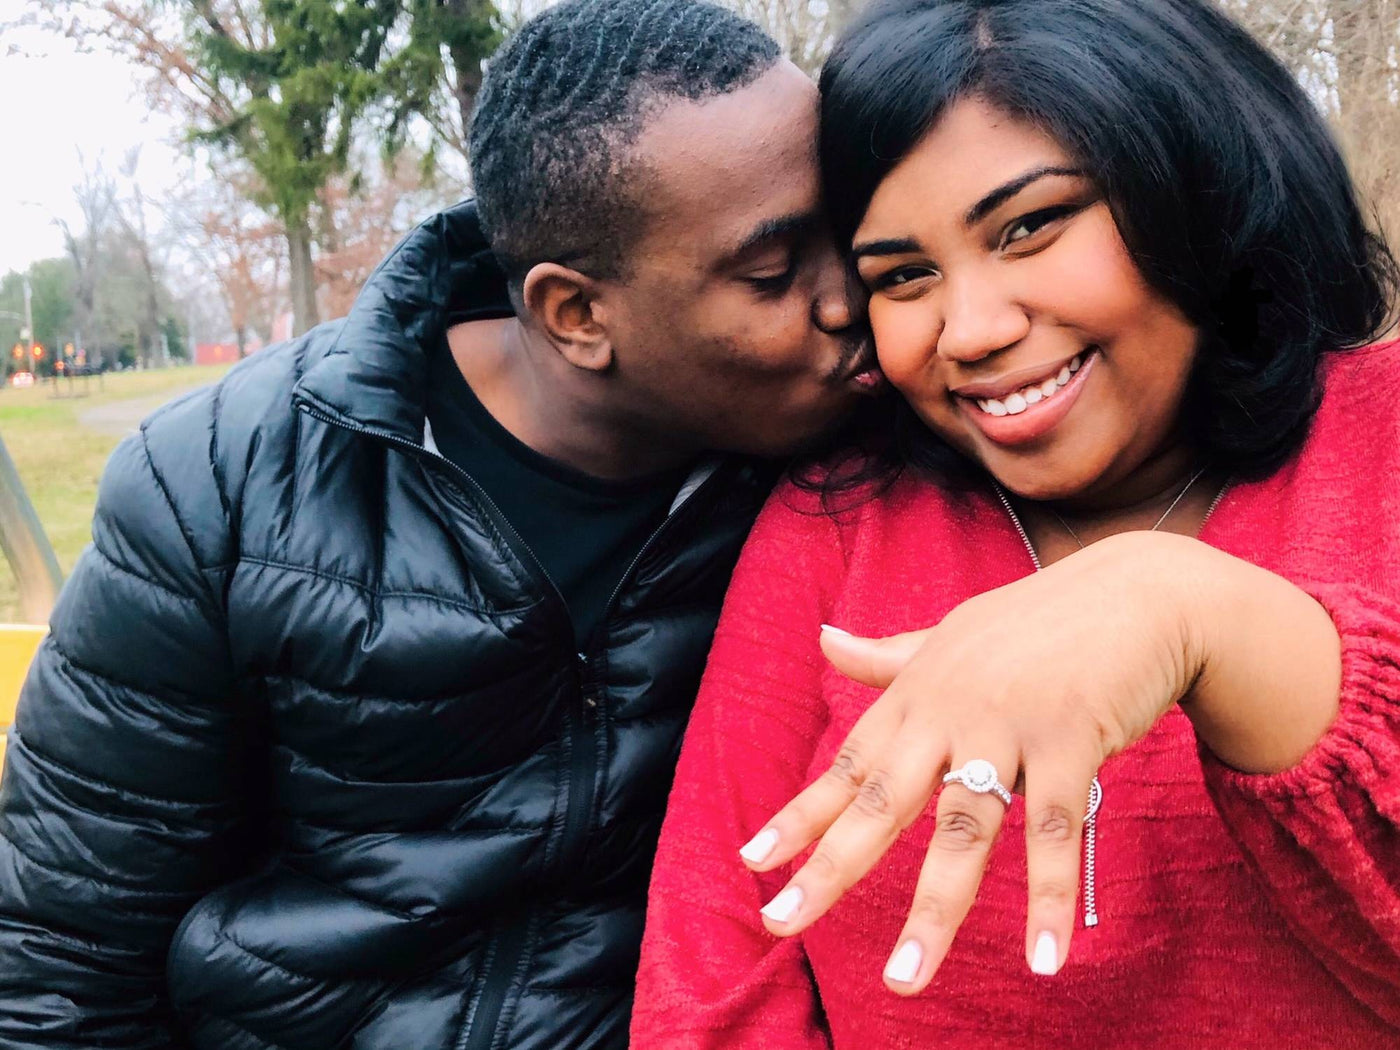 Kiya Shows Off Her Diamond Engagement Ring from Henne Jewelers